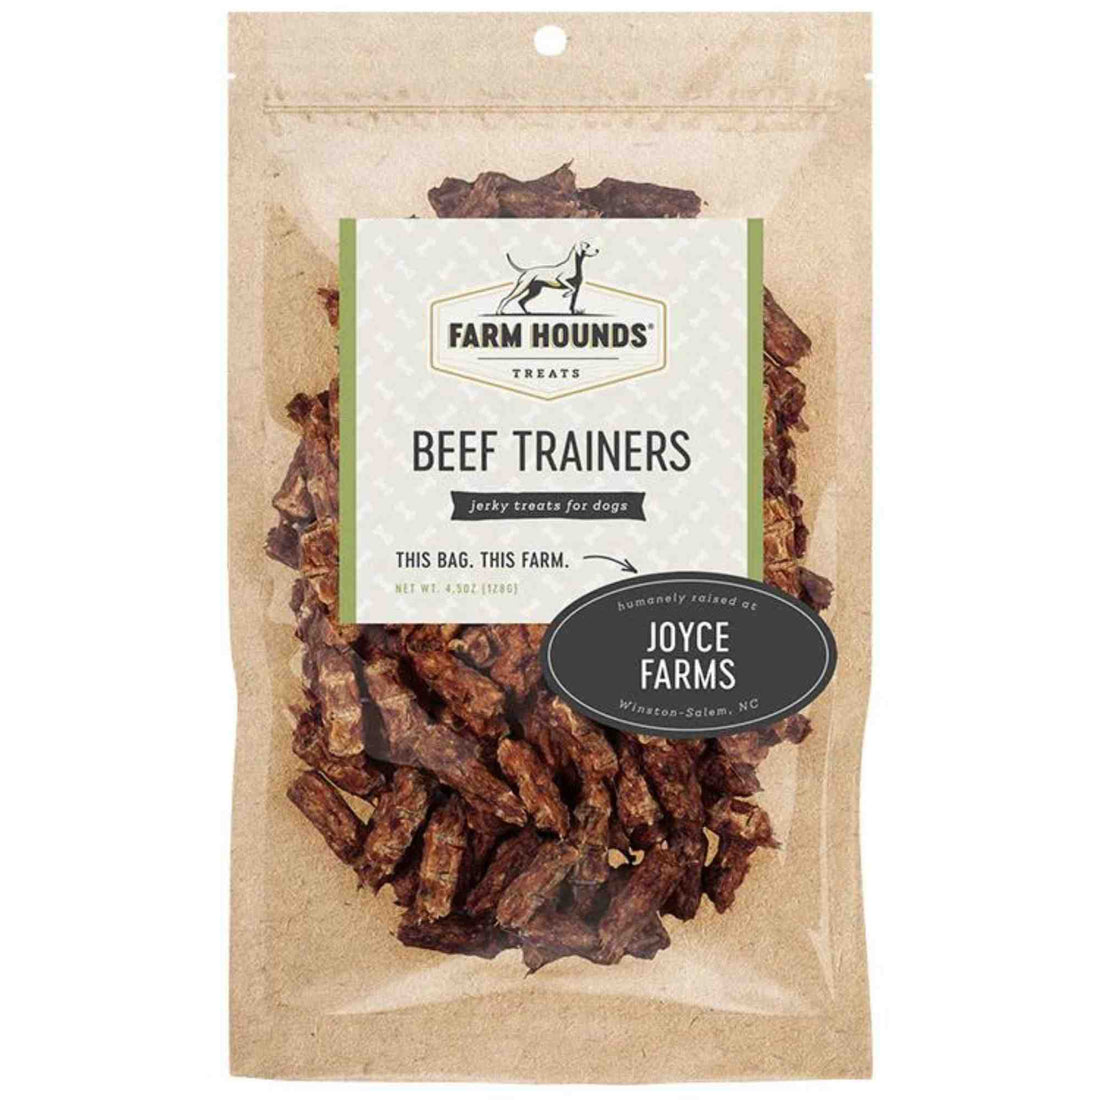 Beef Trainers by Farm Hounds 4.5oz front of bag